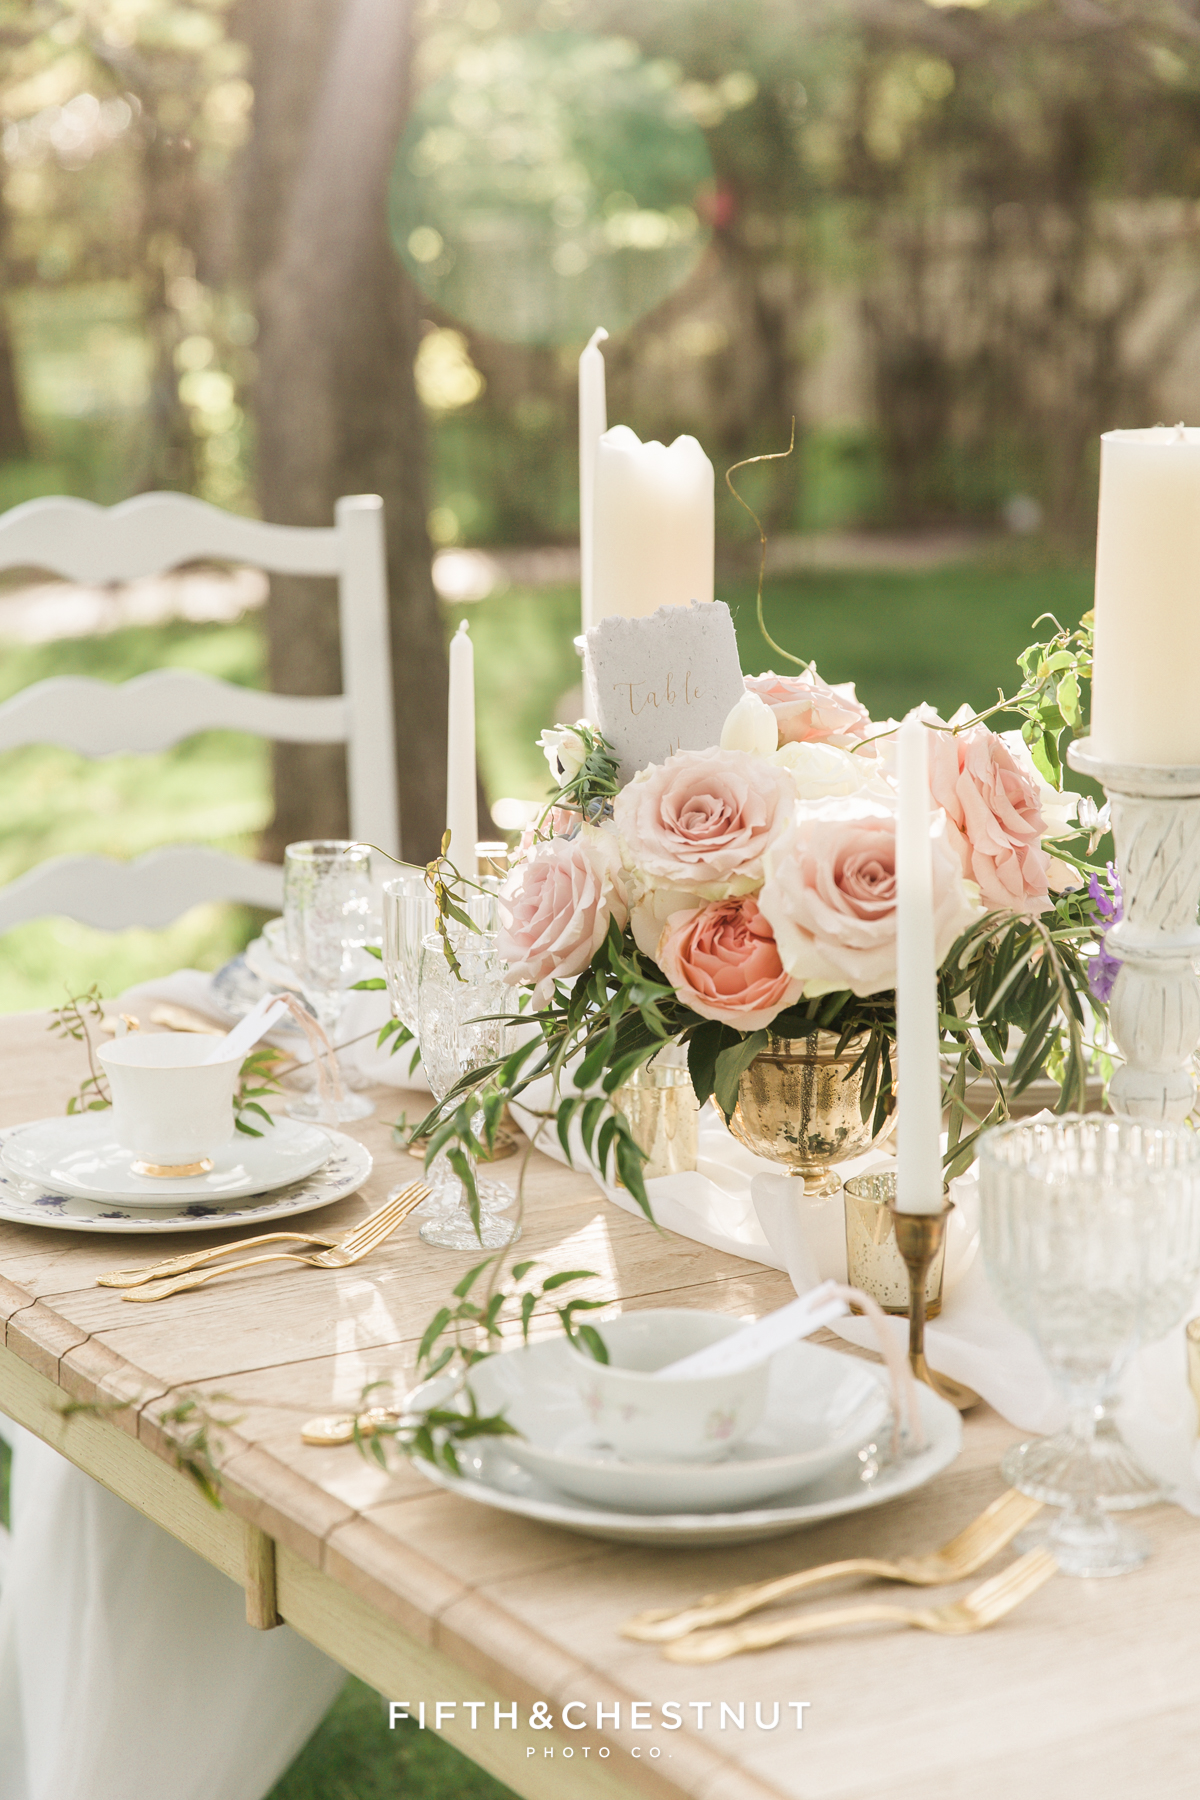 lovely tablescape details at a Dusty Blue Private Estate Country French Wedding Styled Shoot